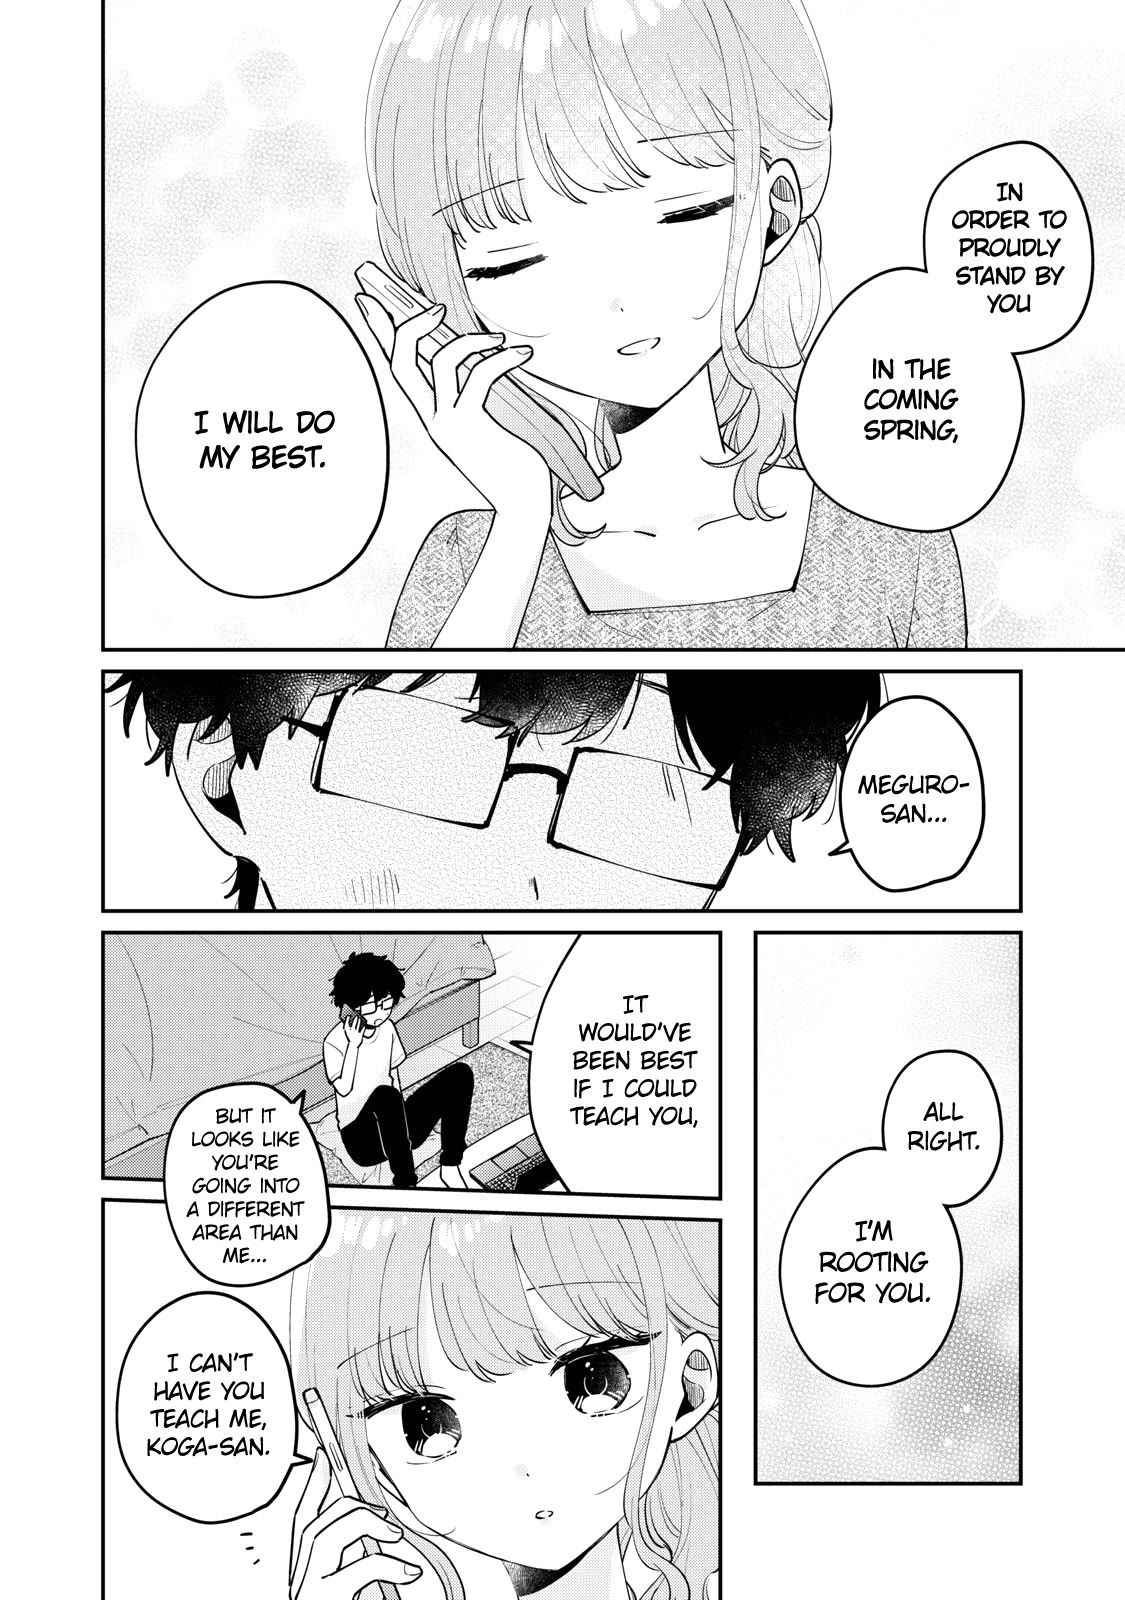 It's Not Meguro-san's First Time chapter 70 page 3